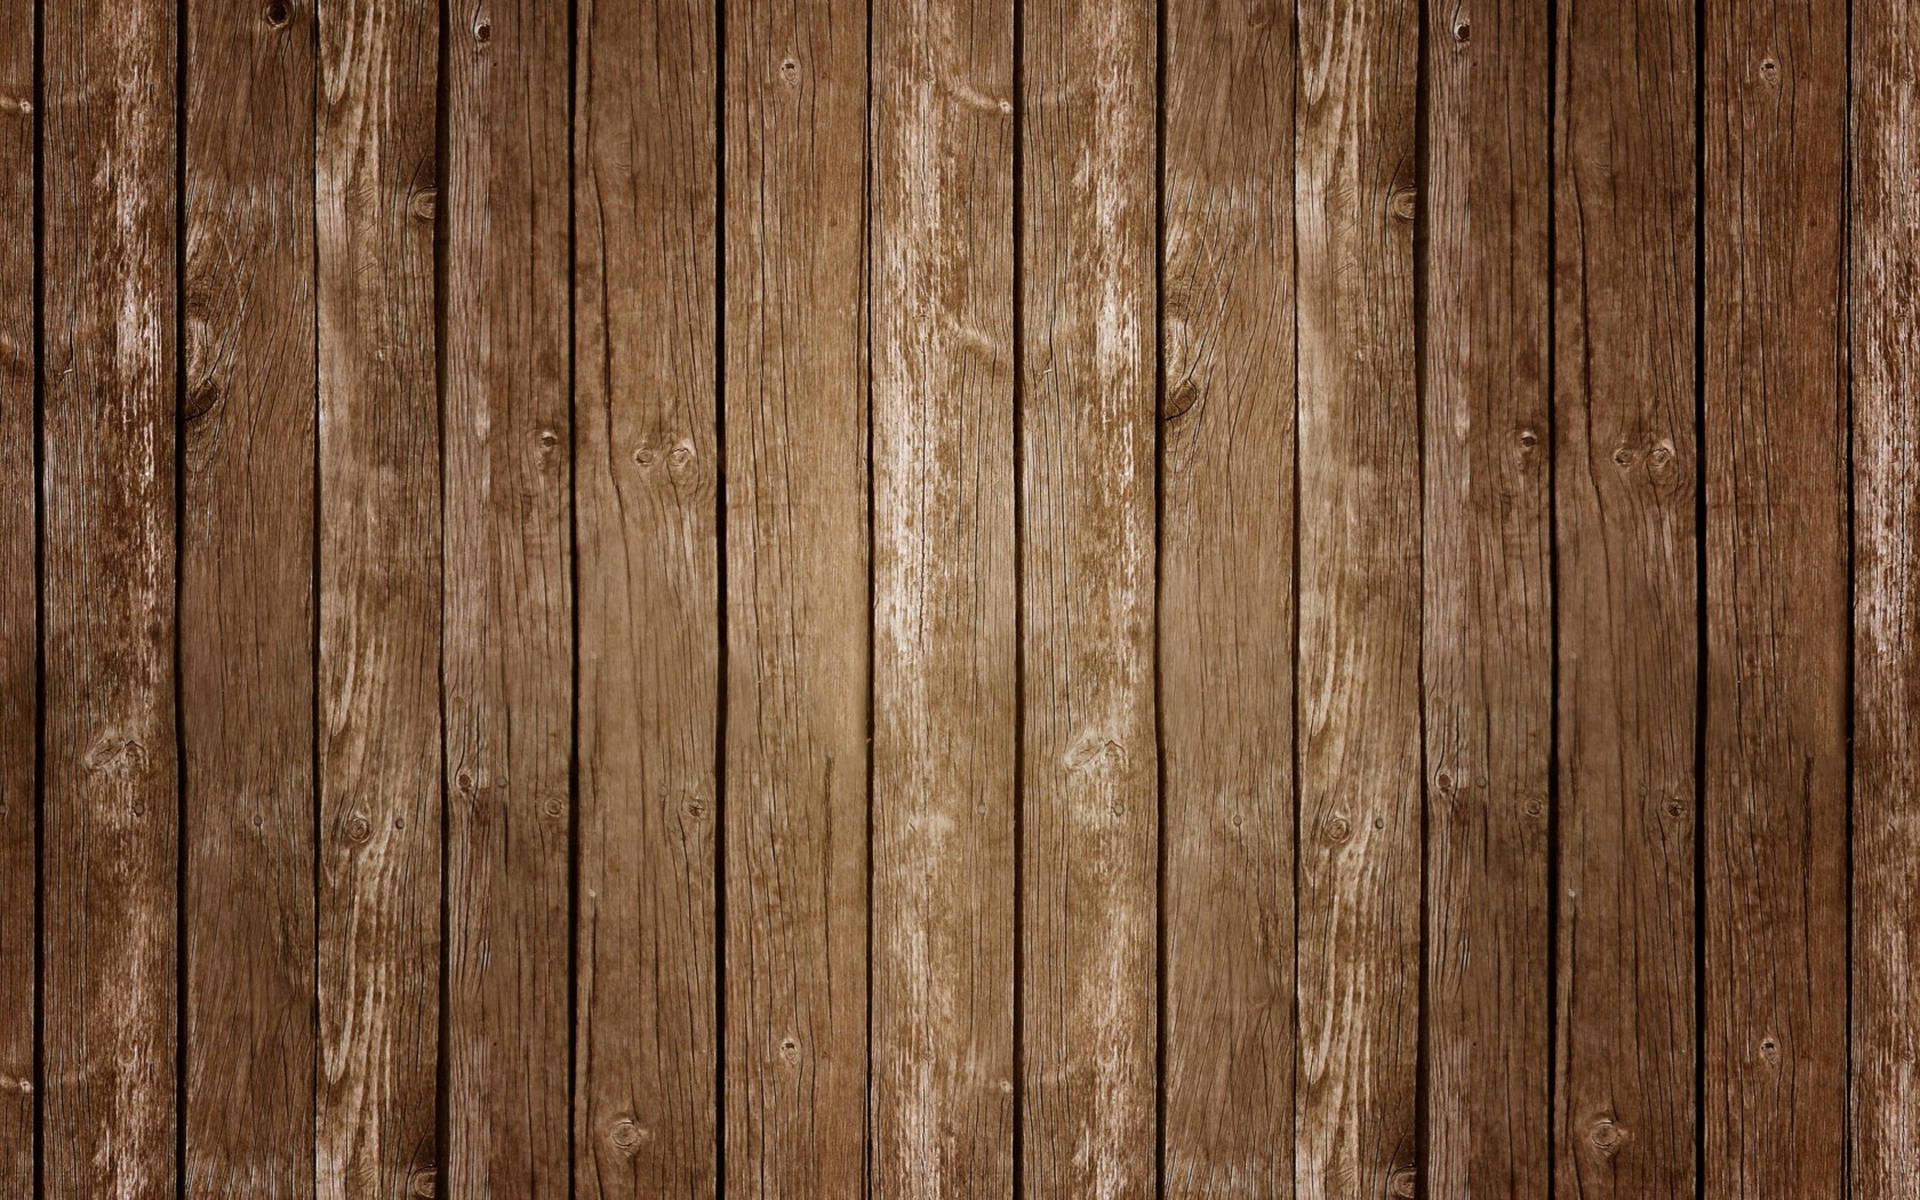 Free Wood Wallpaper Downloads, [500+] Wood Wallpapers for FREE |  